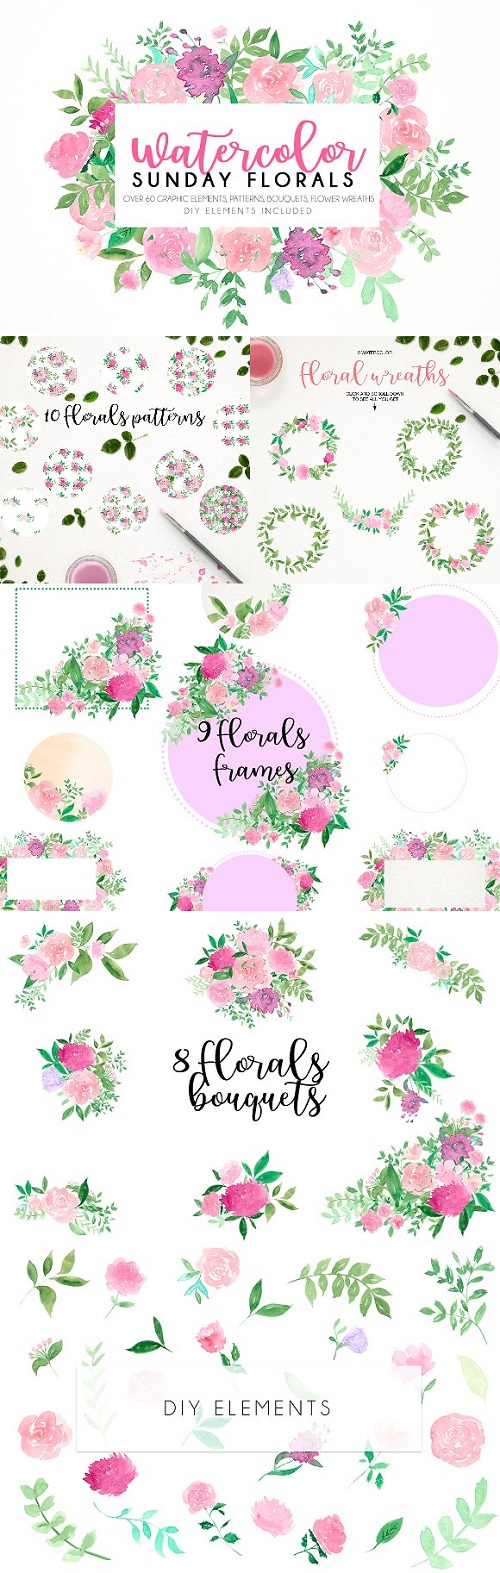 Watercolor Sunday florals - 1536419